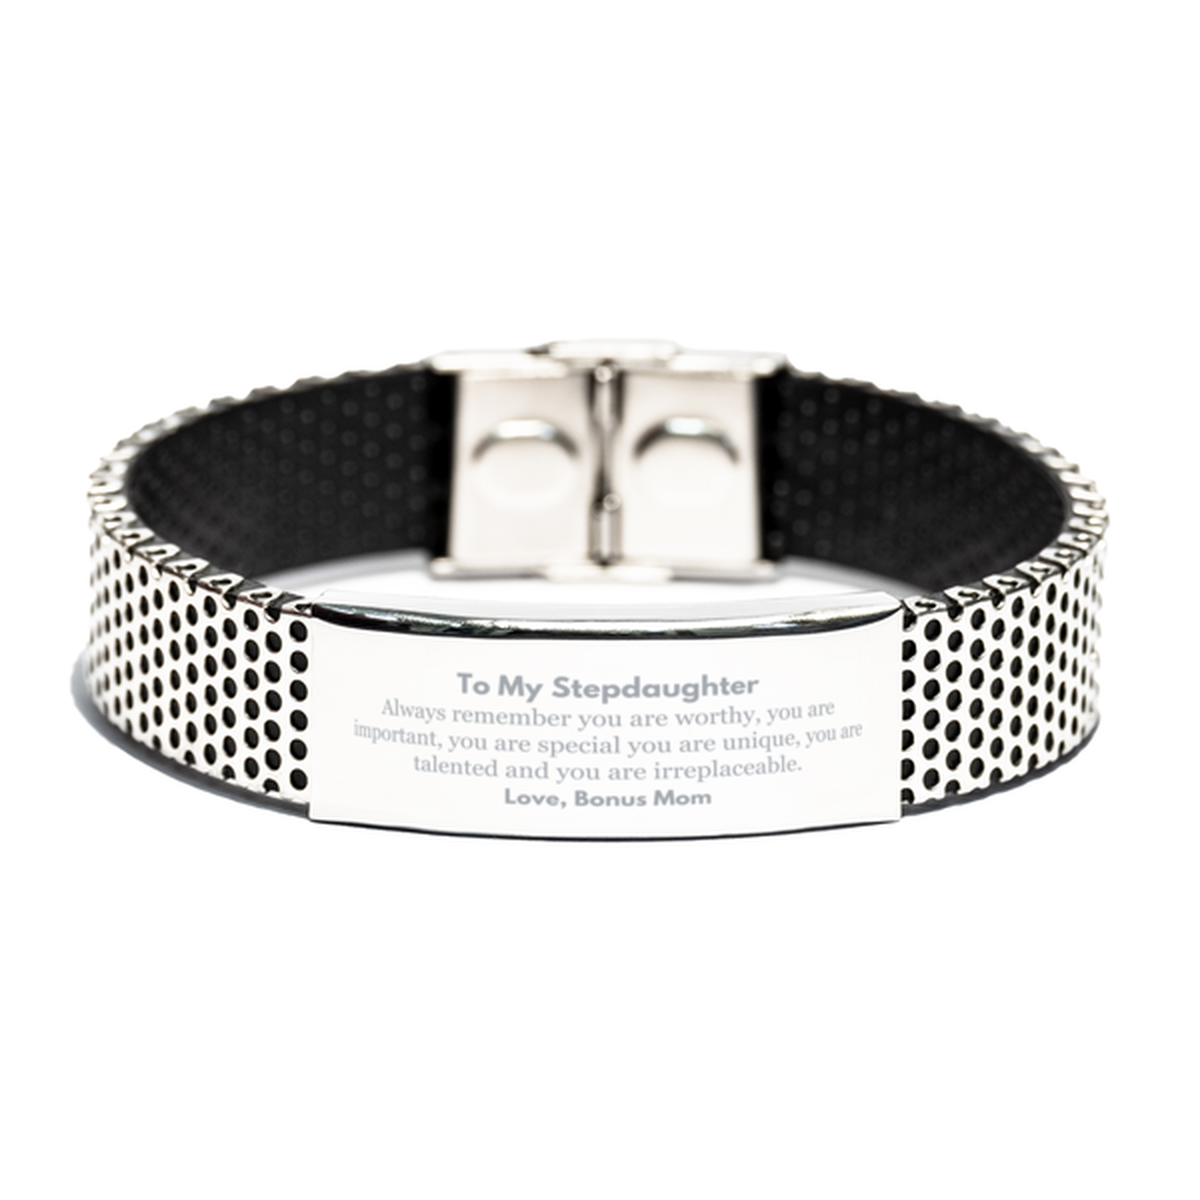 Stepdaughter Birthday Gifts from Bonus Mom, Inspirational Stainless Steel Bracelet for Stepdaughter Christmas Graduation Gifts for Stepdaughter Always remember you are worthy, you are important. Love, Bonus Mom